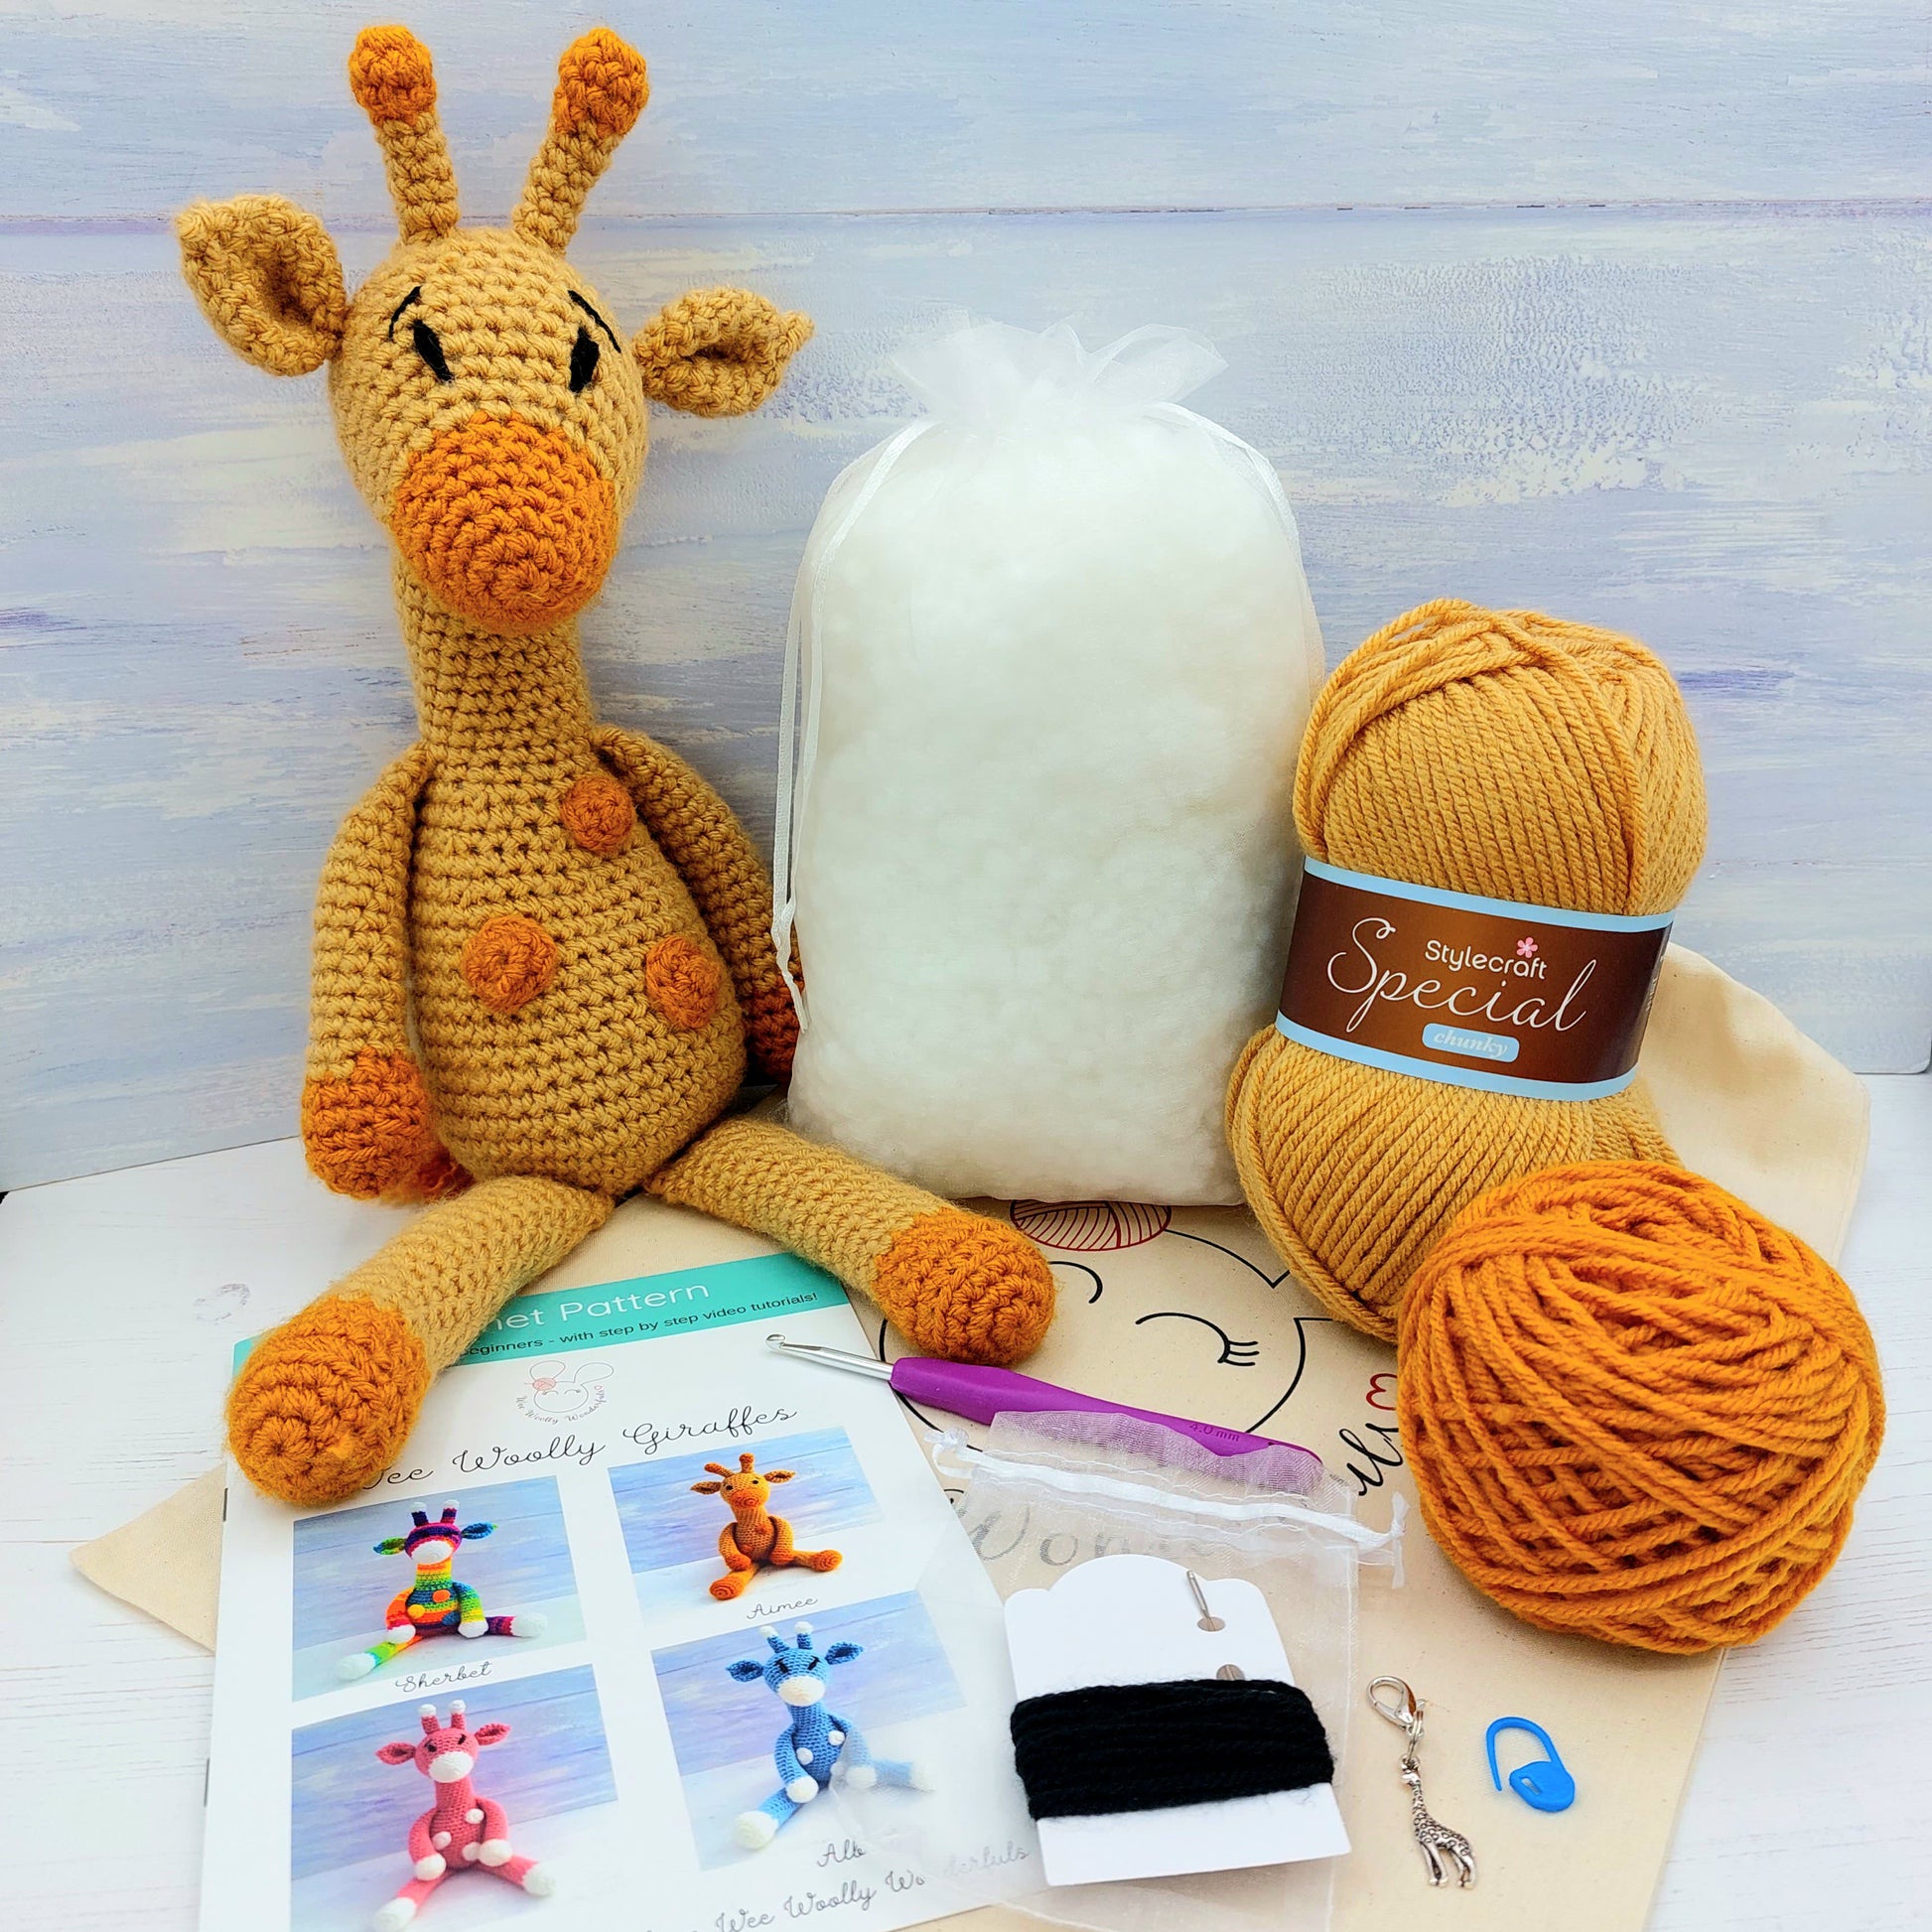 Beginners Crochet Kit, Cute Small Animals Kit for Beginers and Experts, All  in One Crochet Knitting Kit, Step-by-Step Instructions Video, Crochet